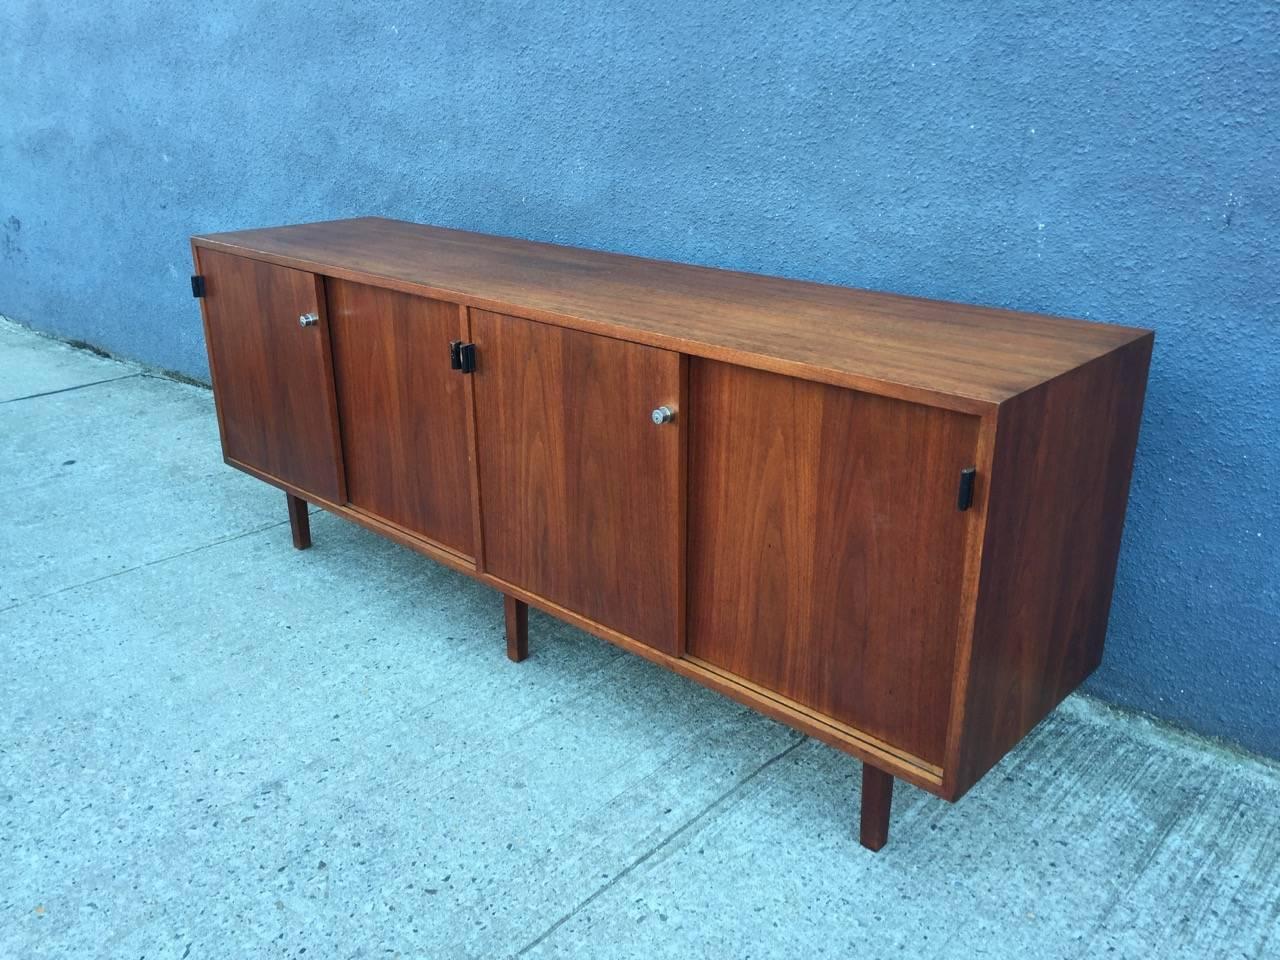 For your consideration is a rare walnut cased credenza designed by Florence Knoll for Knoll, featuring leather pulls and walnut legs. This is an early version of Florence Knoll’s iconic storage unit, with the feet supporting the casing from